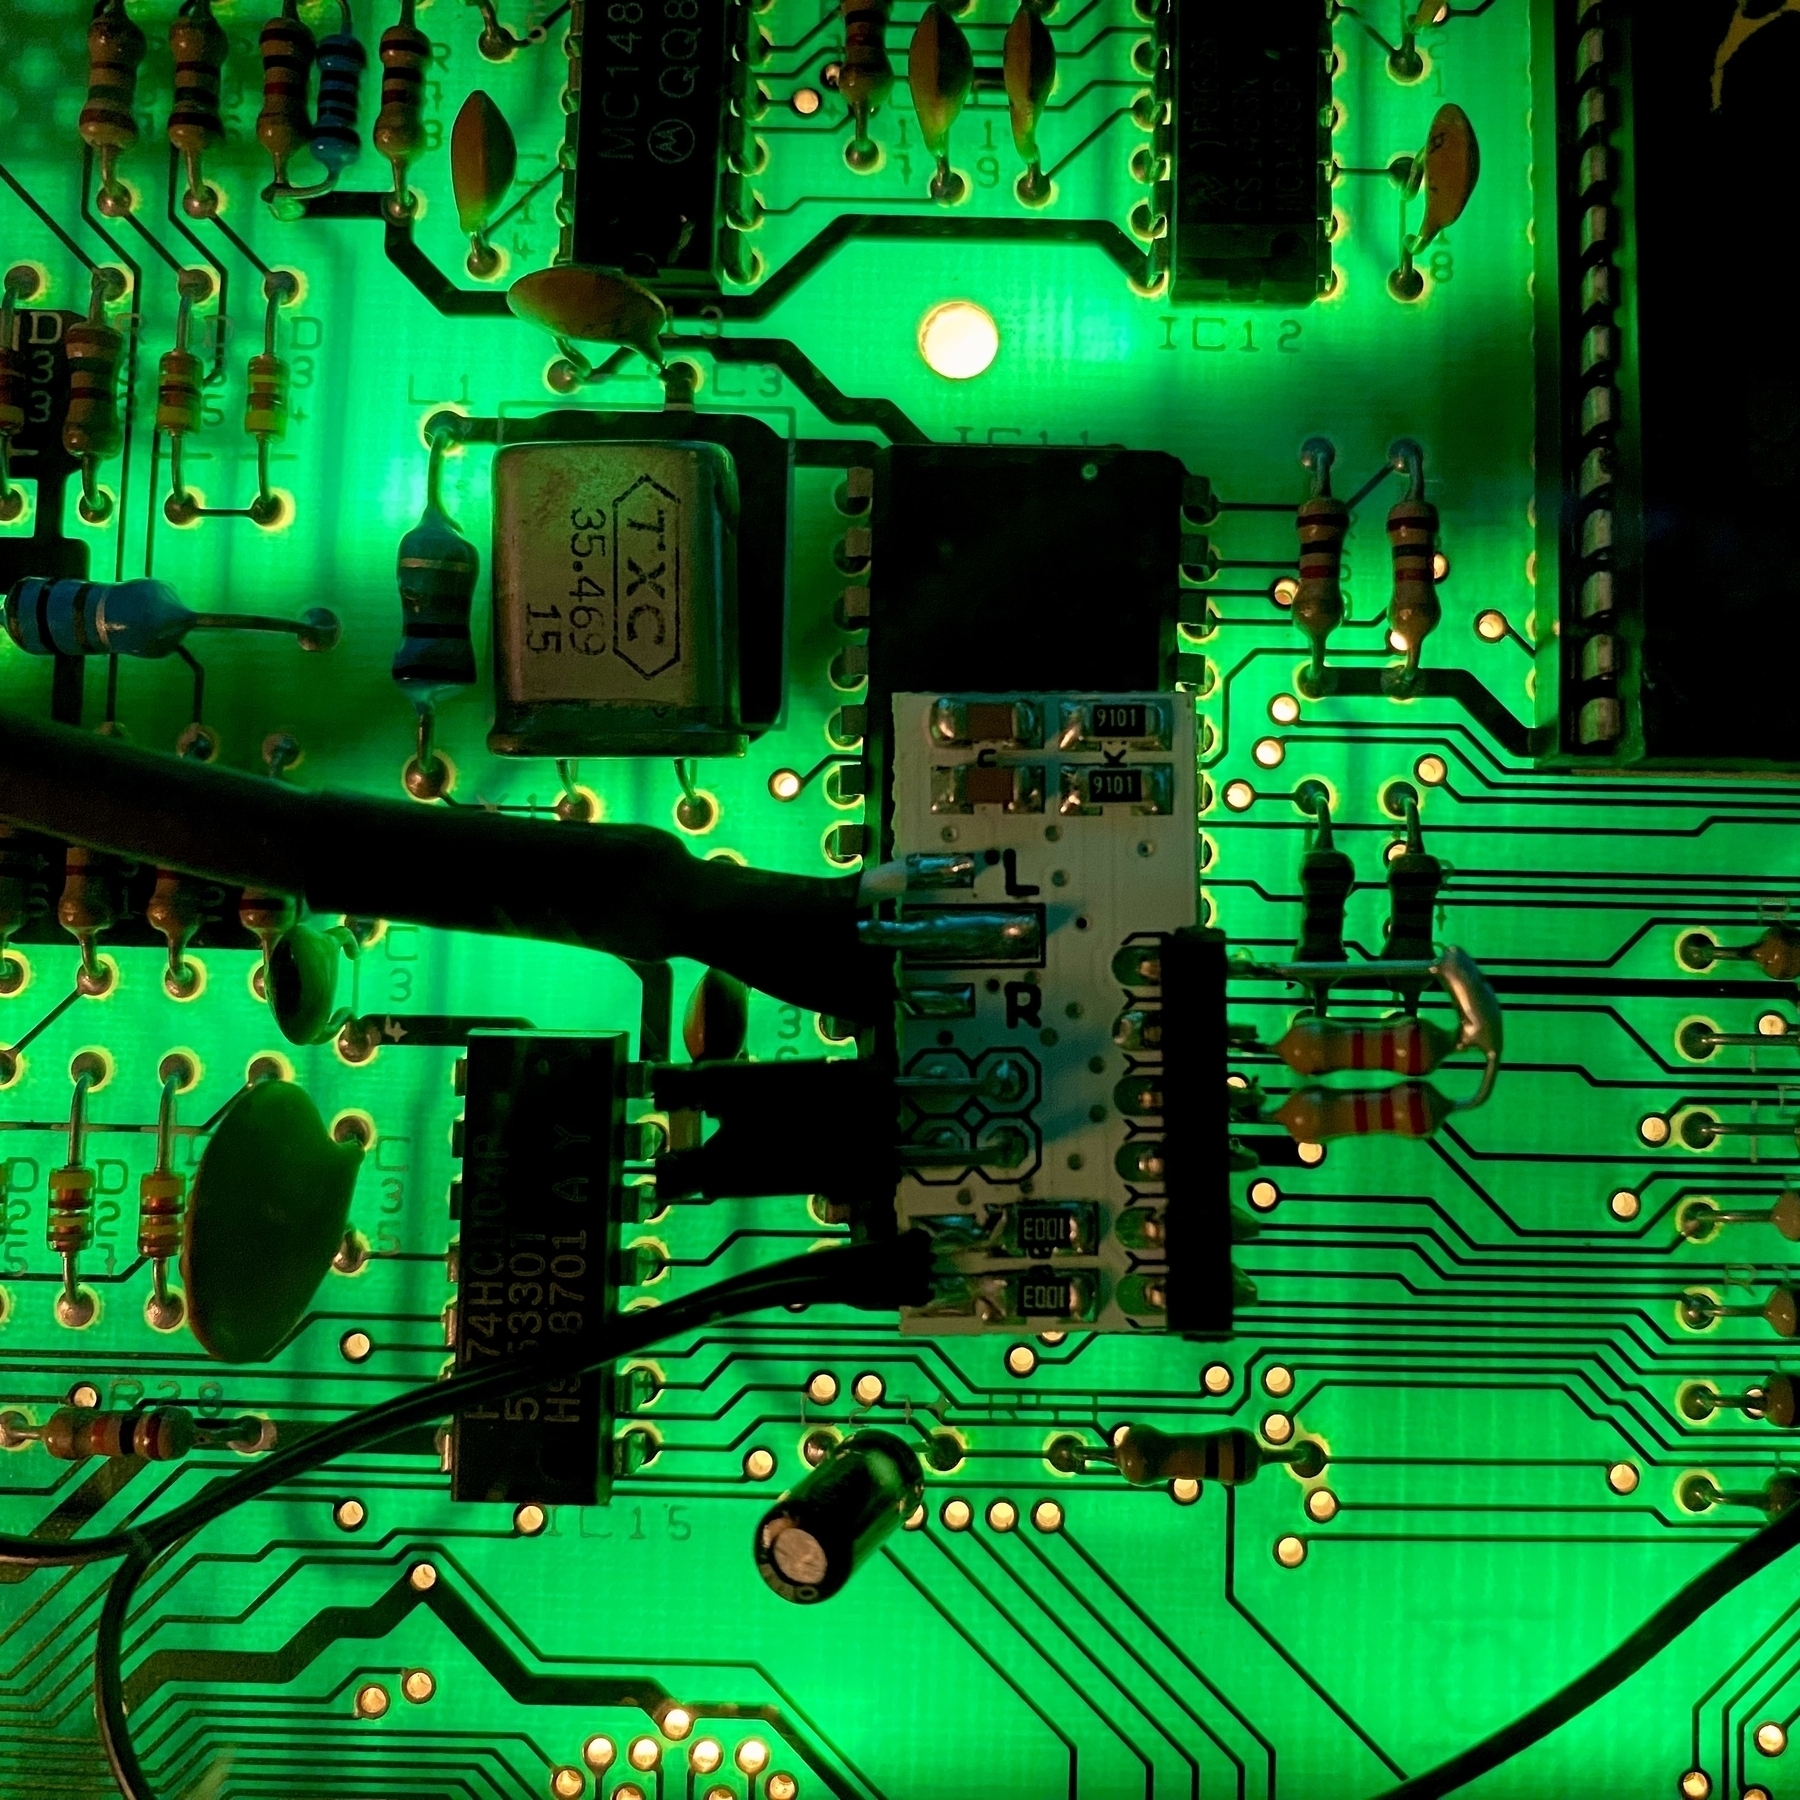 Close up photo of a back-lit printed circuit board. In the centre of the image a white adapter-board with very small components has been attached on top of a large microchip. Various wires are coming off the adaptor and out of sight.